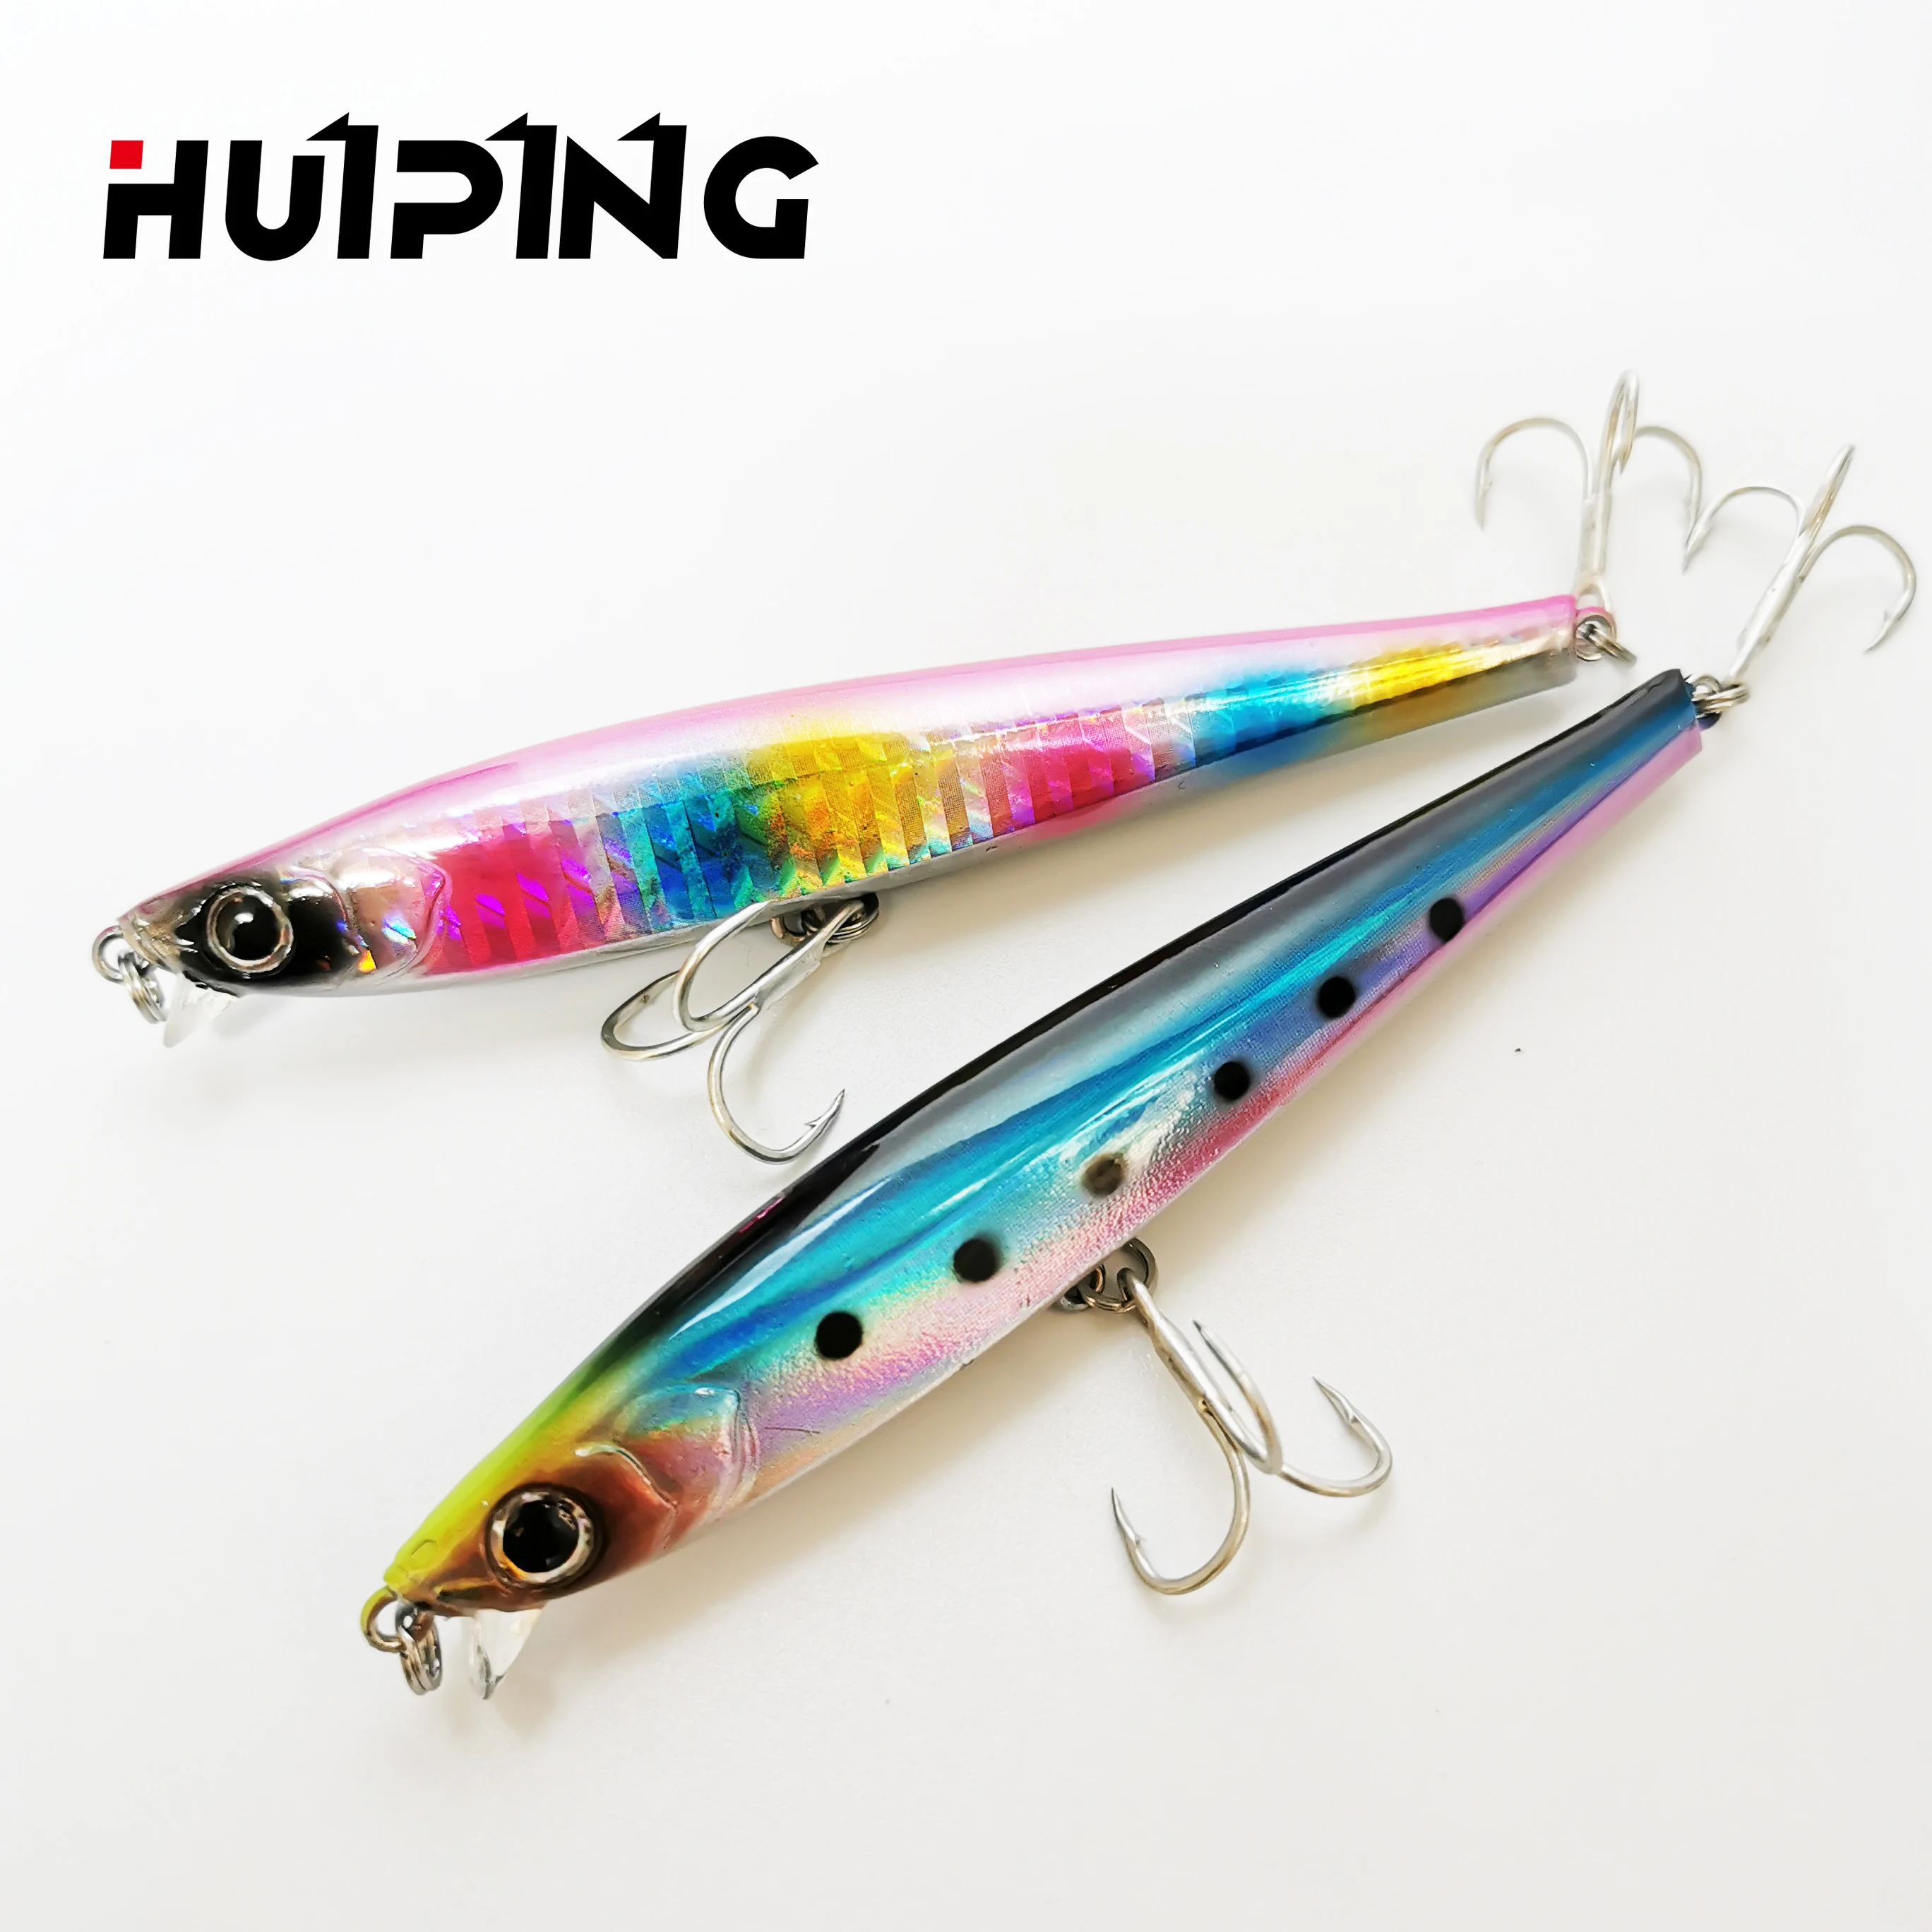 

HUIPING fish pesca 105mm 30g high quality fishing lures minnow hard bait sinking artificial bait fishing lure, 13 colors